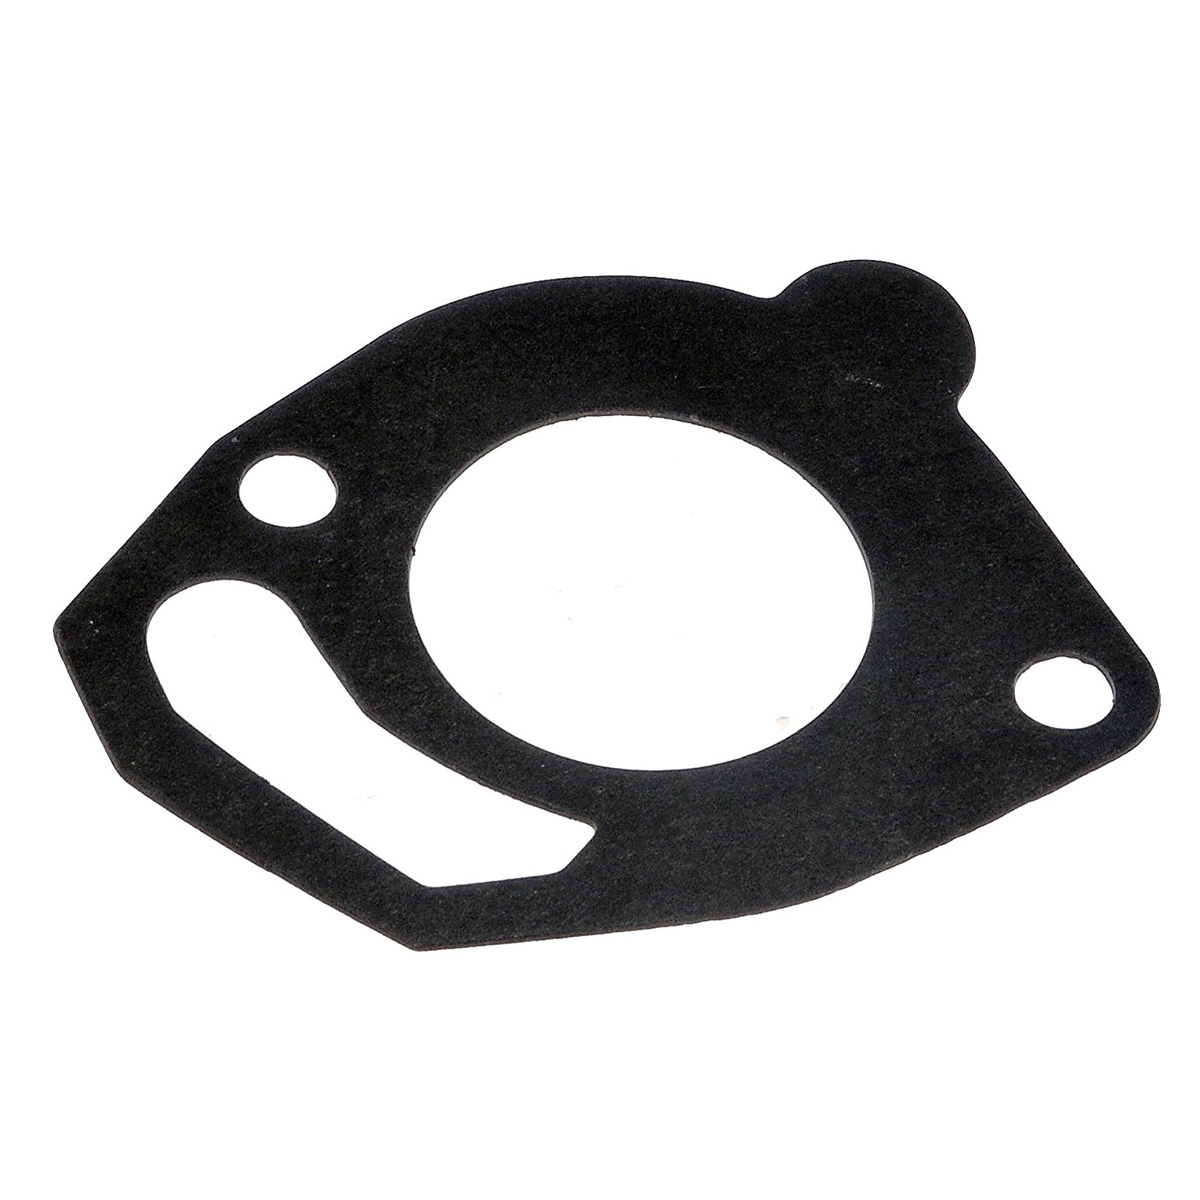 AUDI A6 ALLROAD Thermostat Gasket